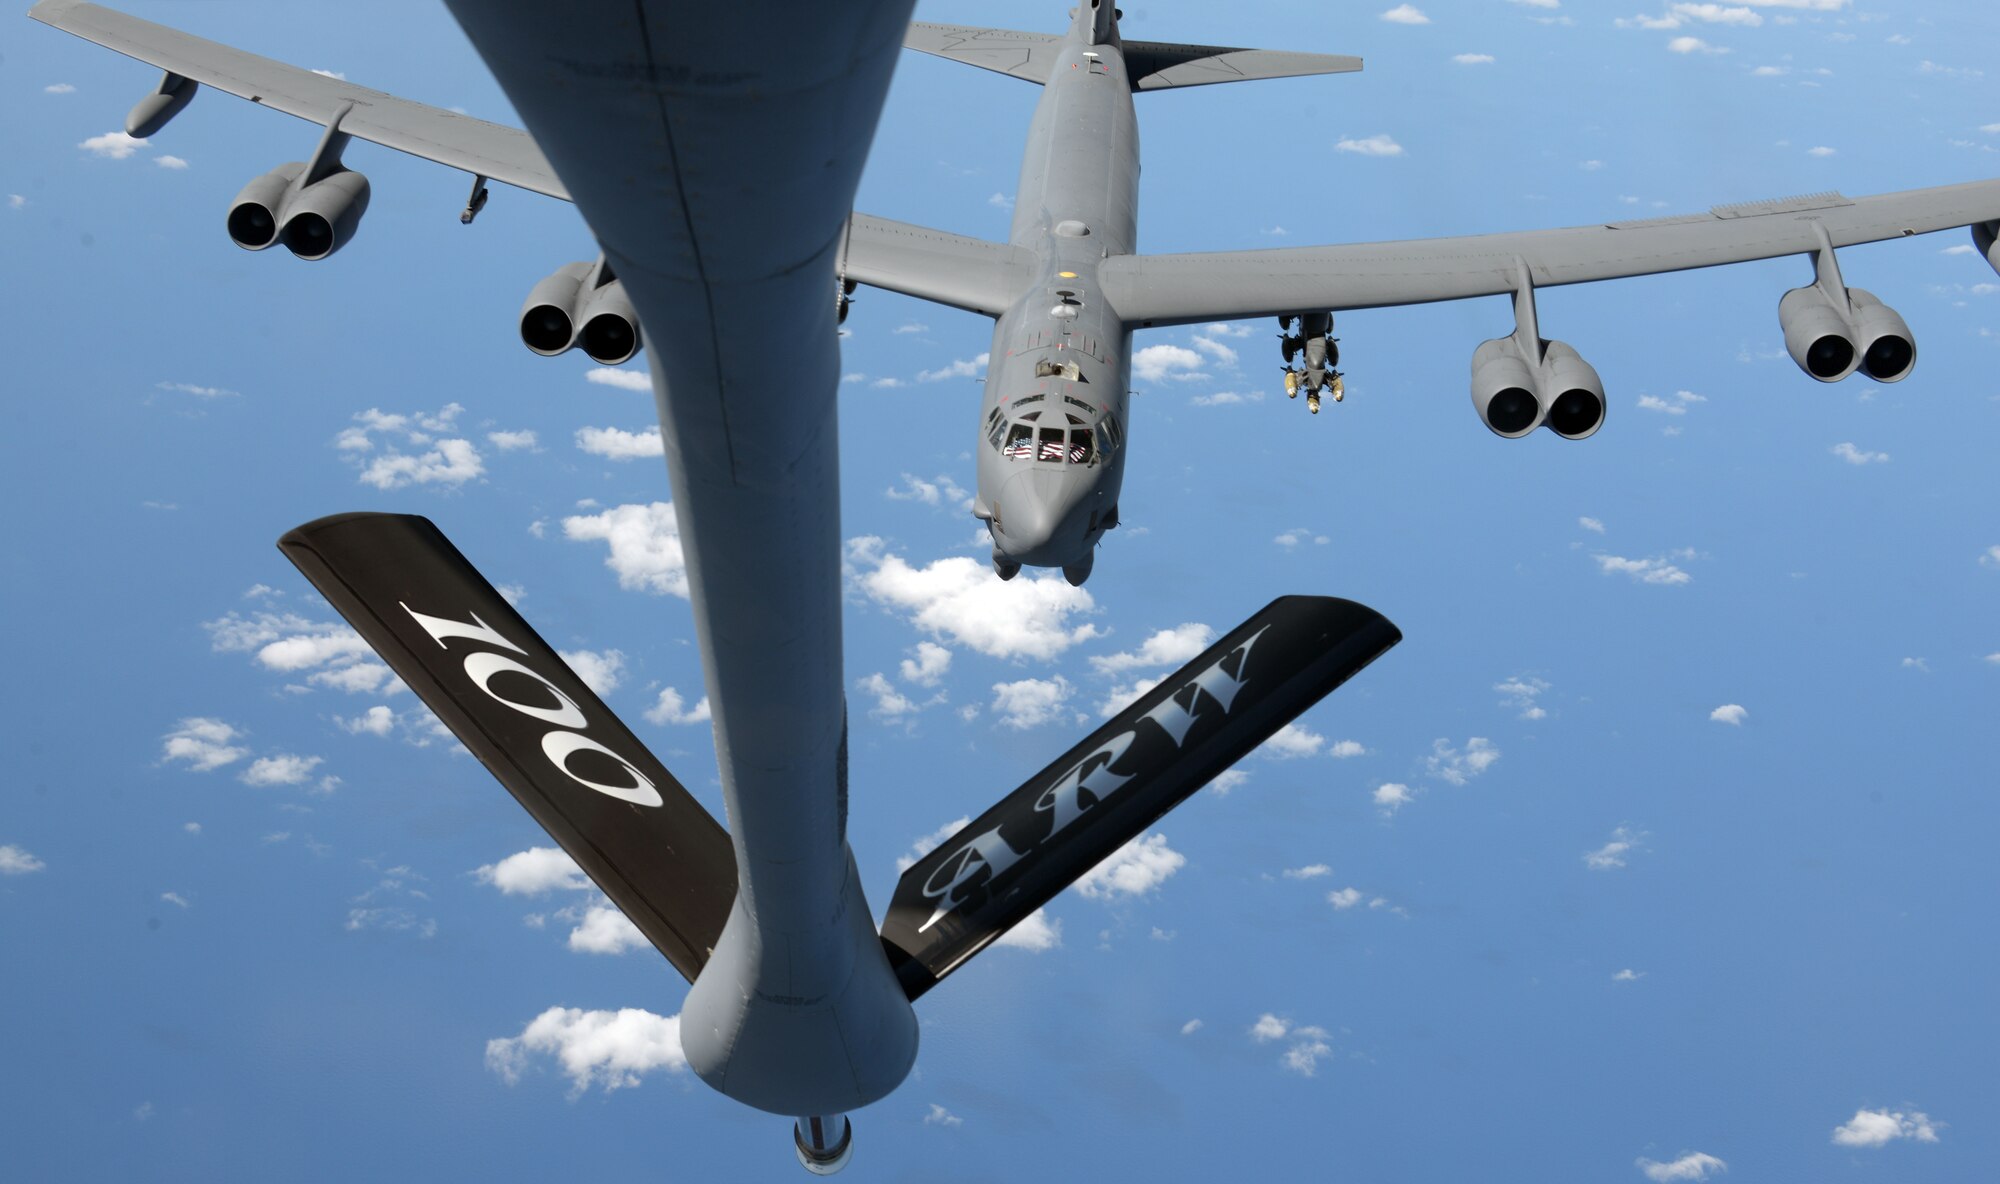 A U.S. Air Force B-52 Stratofortress from Barksdale Air Force Base, La, approaches a KC-135 Stratotanker from RAF Mildenhall, England, Sept. 27, 2017, over the Mediterranean Sea. Part of the B-52’s training during its deployment includes releasing inert ordnance while flying over controlled airspace areas of the Netherlands and the United Kingdom.  (U.S. Air Force photo by Airman 1st Class Benjamin Cooper)